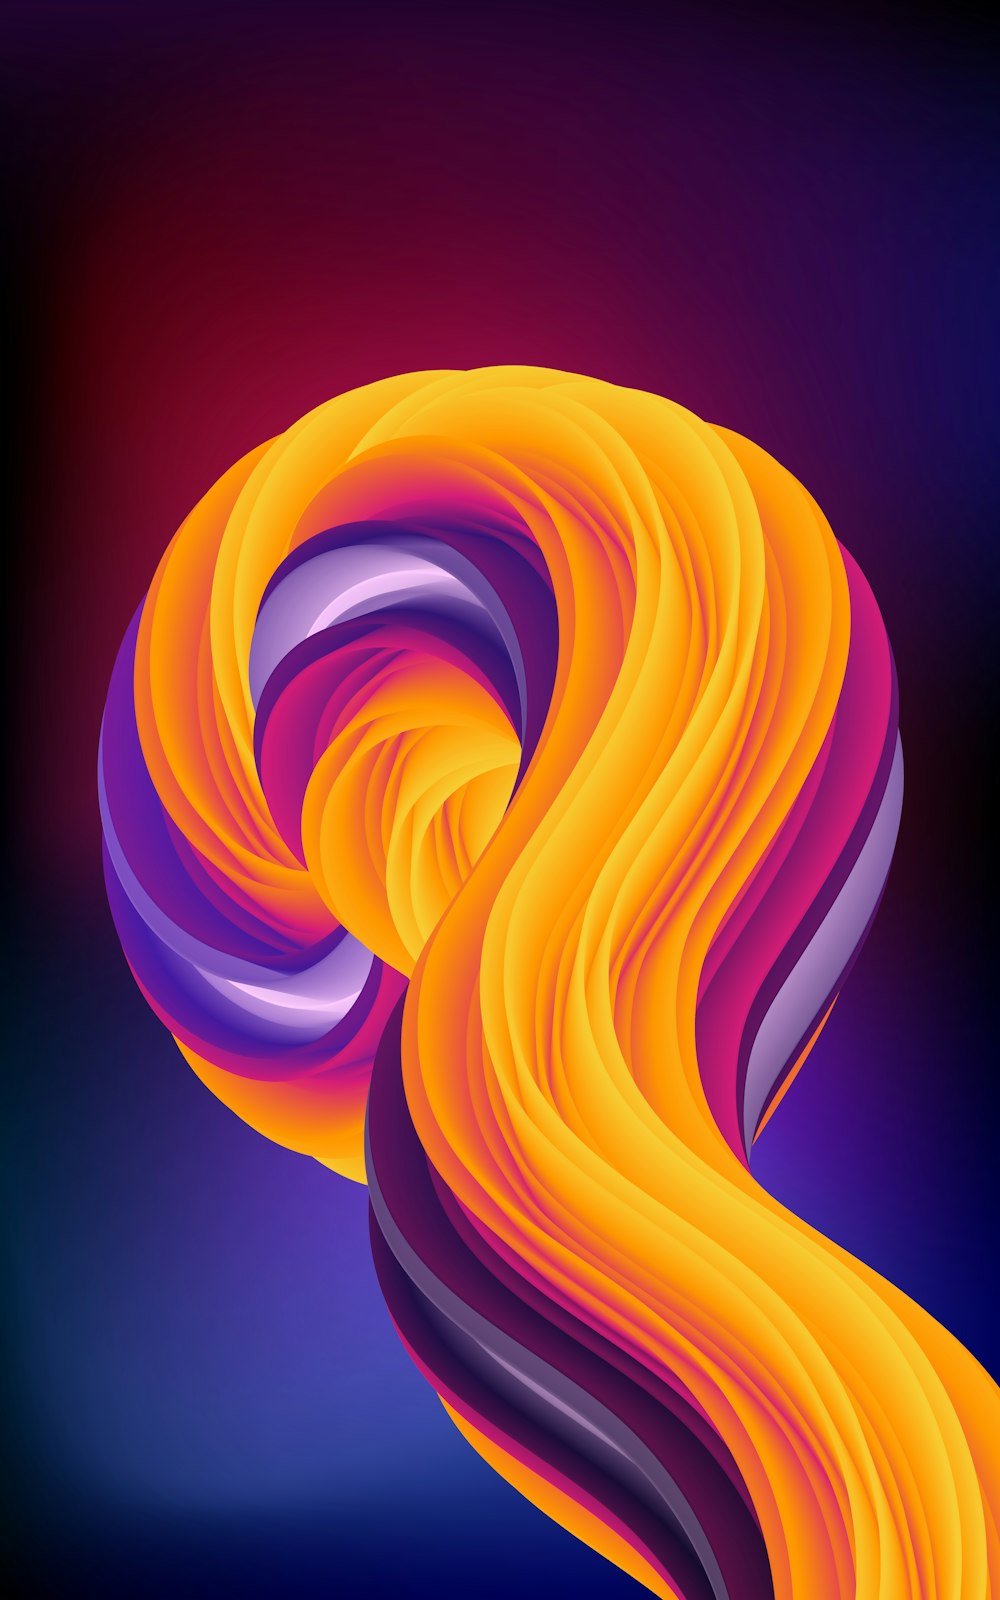 an abstract background with a wavy orange and purple design